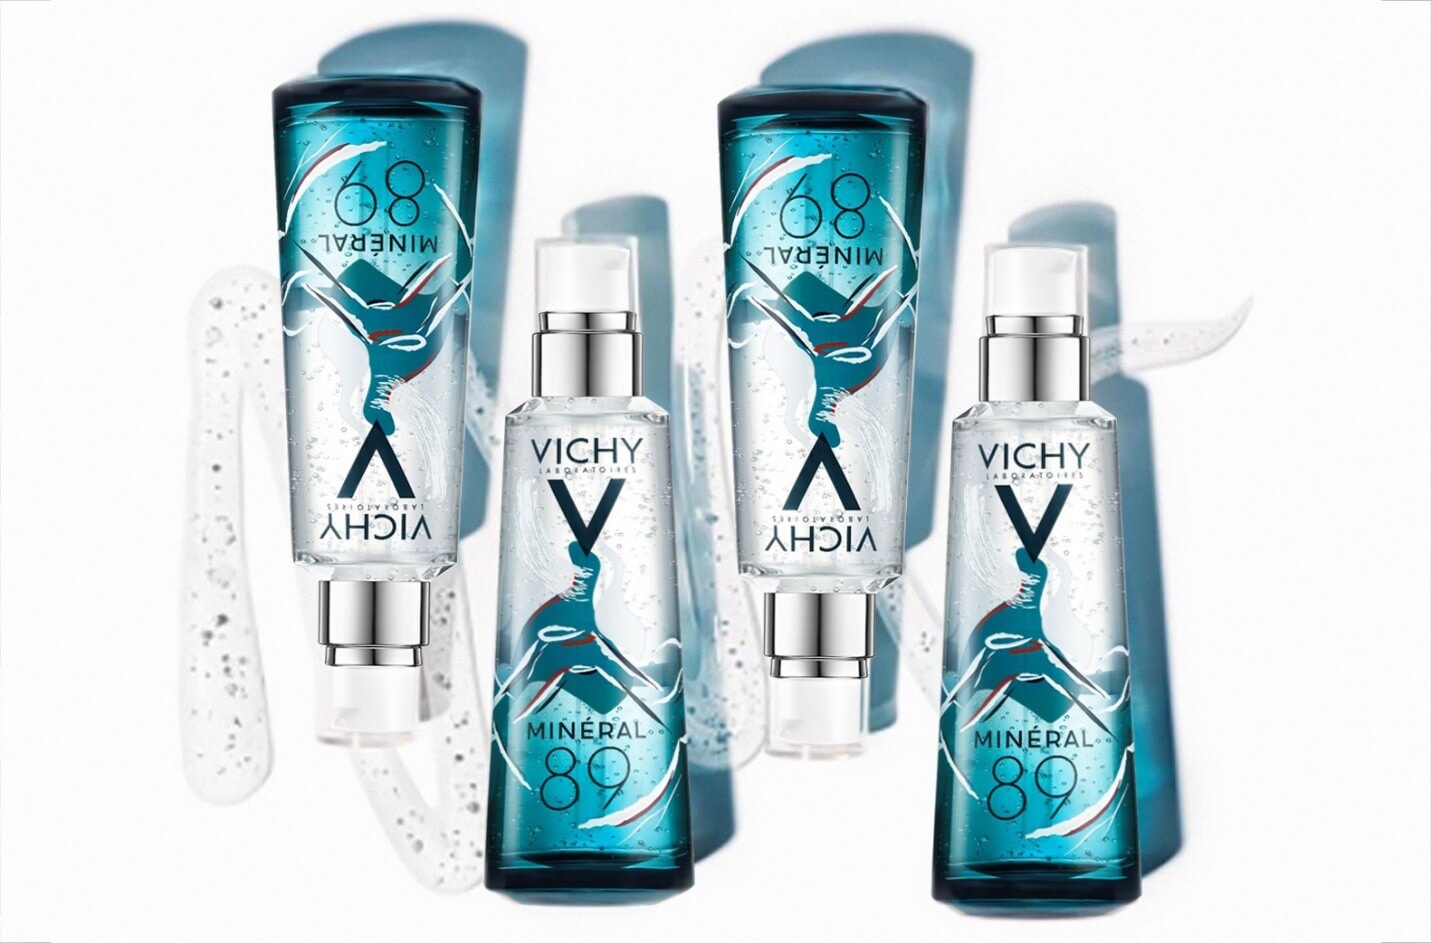 VICHY MINERAL 89 LIMITED EDITION 2020 1